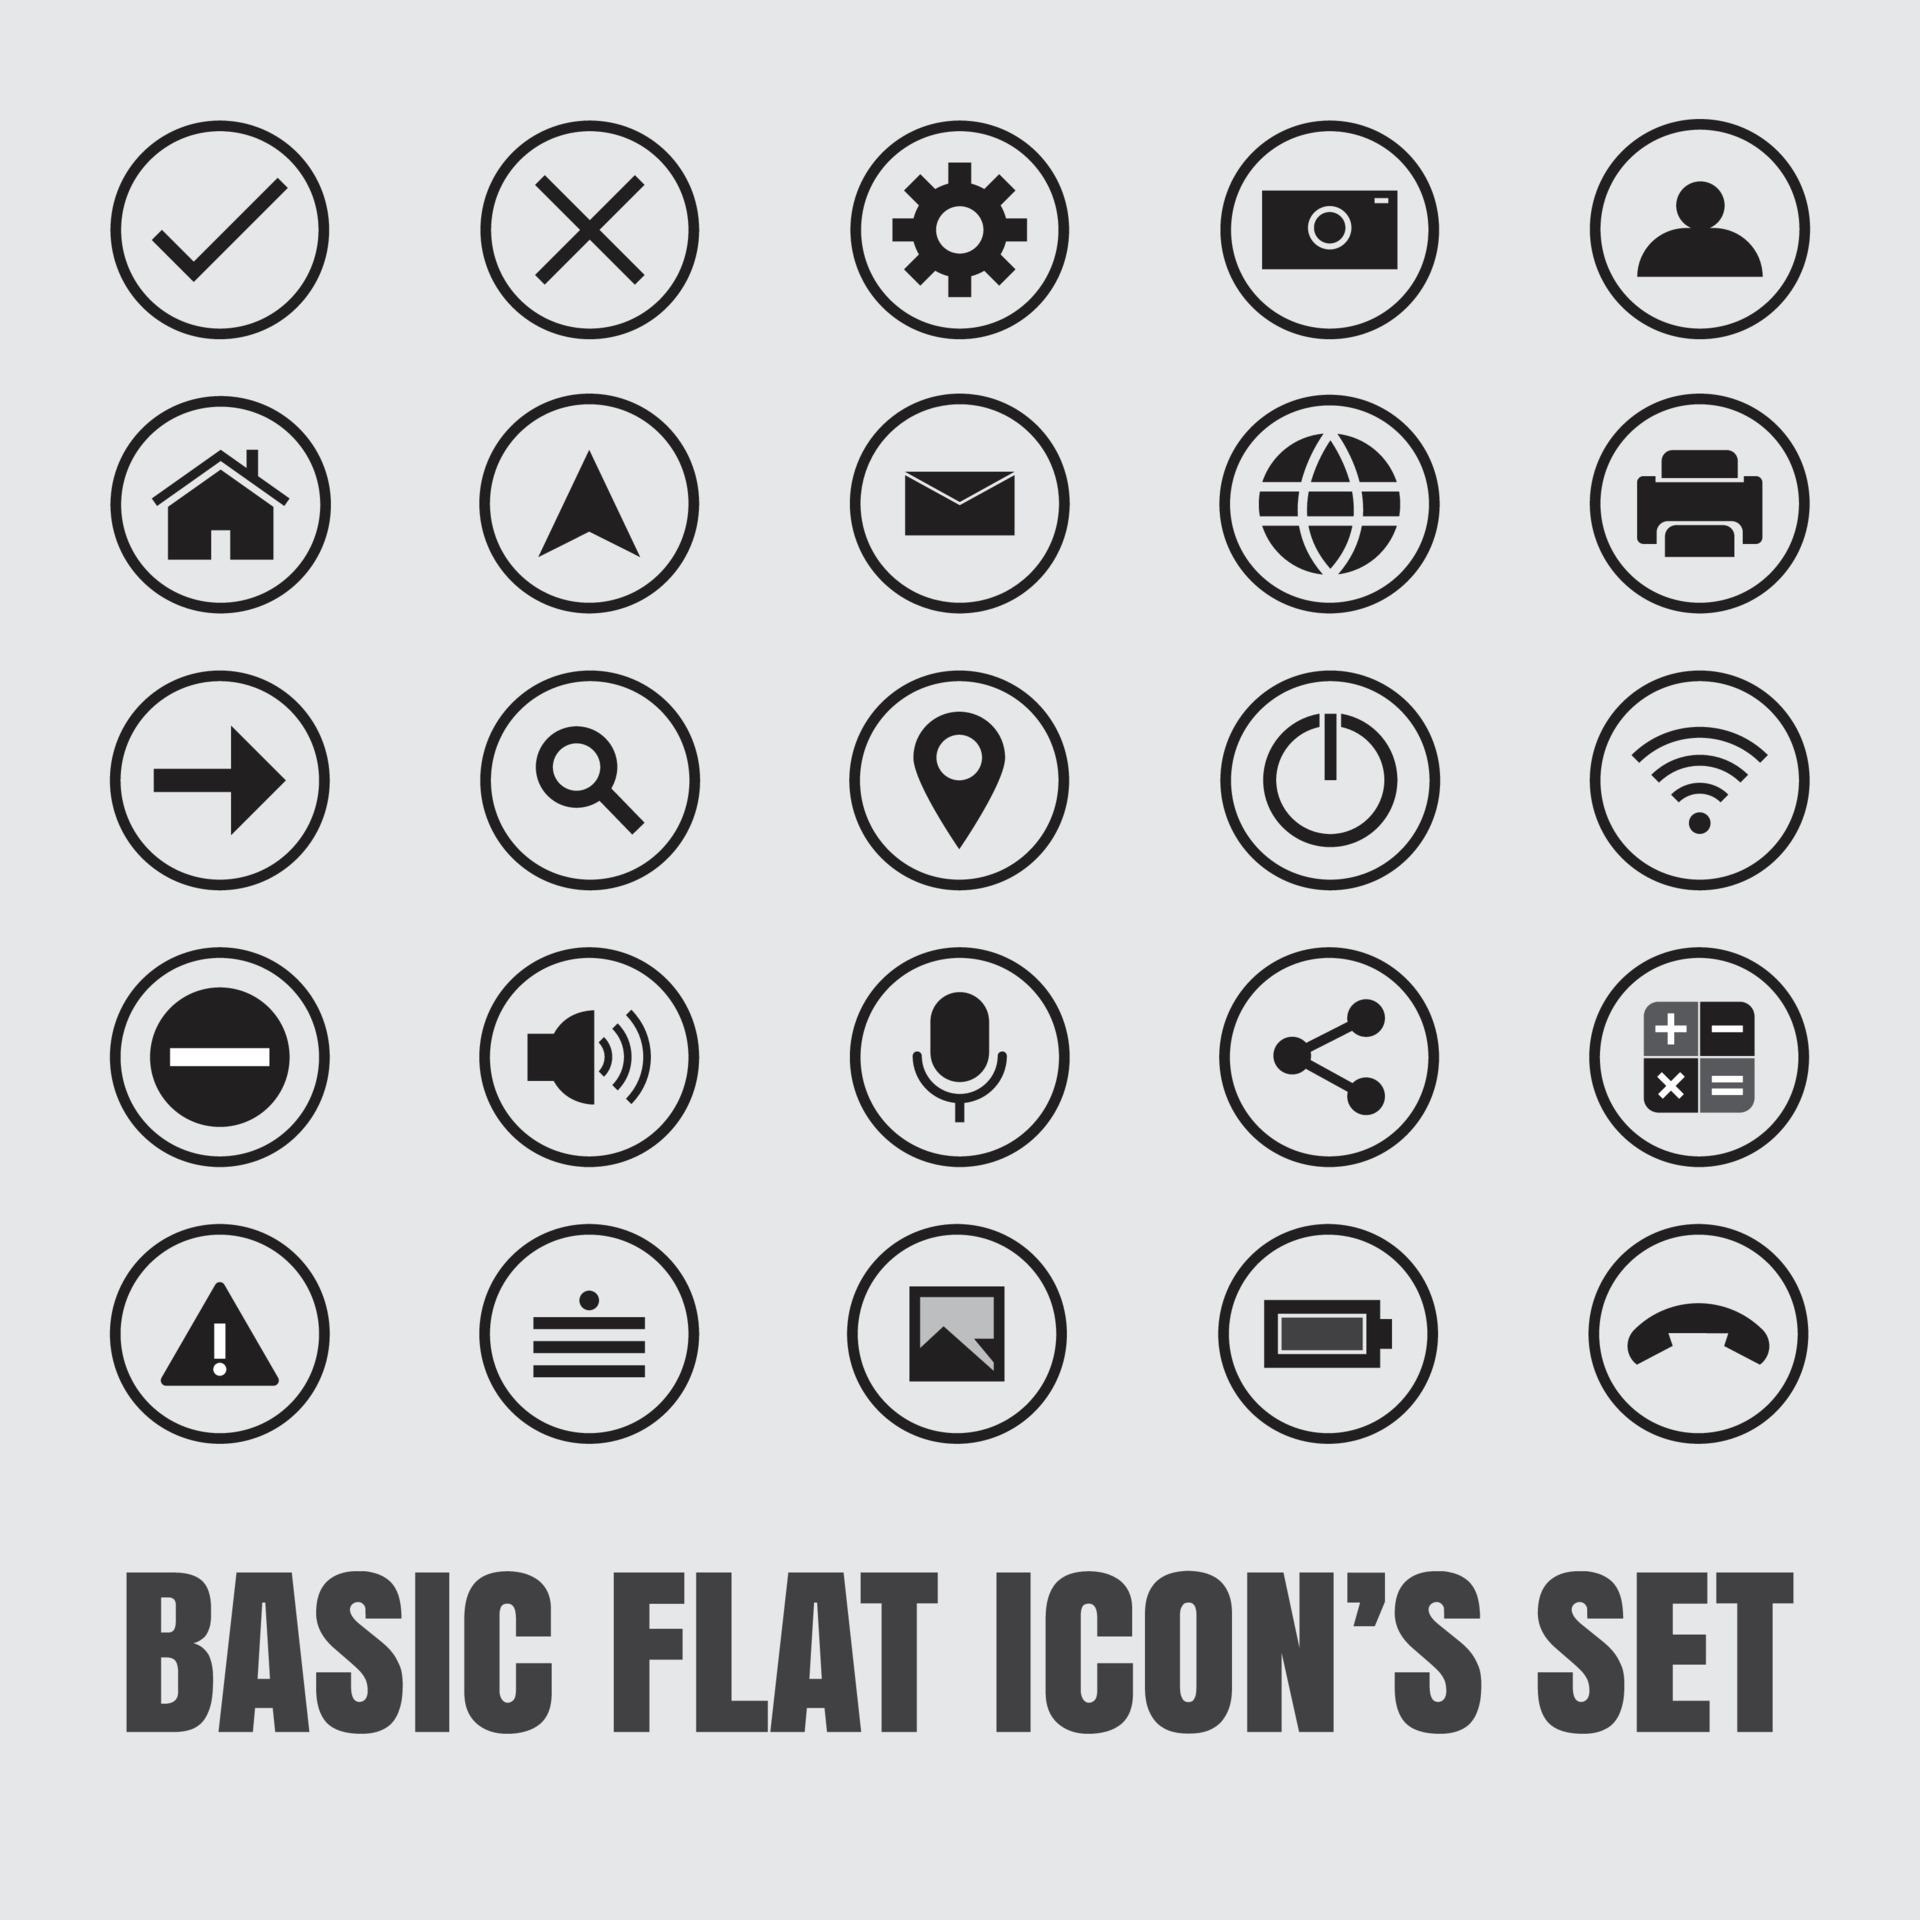 Basic flat icons set. Simplicity meets versatility in our Basic Flat Icon  Set. Ideal for web, app, or print designs, these flat vector icons offer a  modern and clean aesthetic to enhance